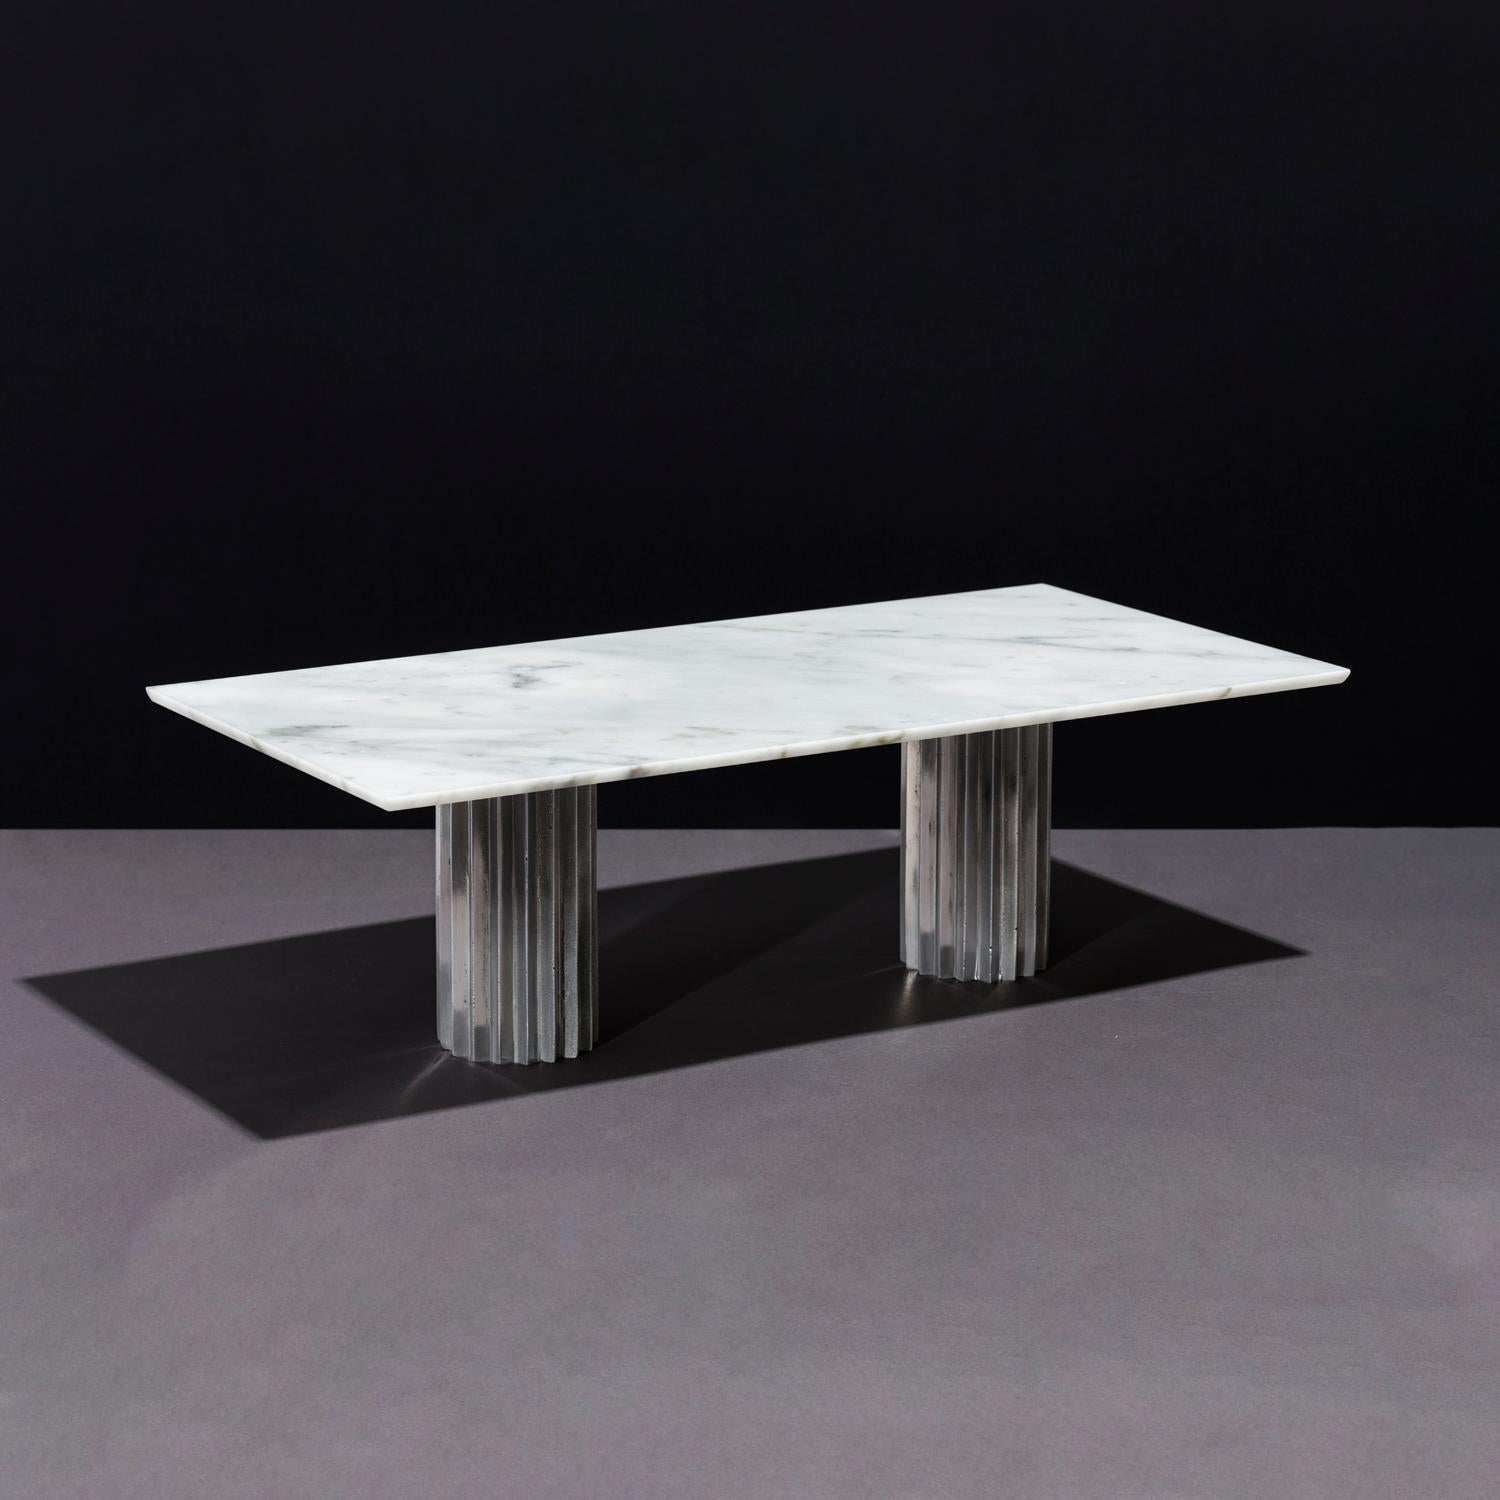 Doris White Carrara Marble Rectangular Dining Table by Fred and Juul
Dimensions: D 120 x W 240 x H 74 cm.
Materials: Aluminum and white Carrara marble.

Available in round, oval and rectangular shapes. Also available in different materials. Custom